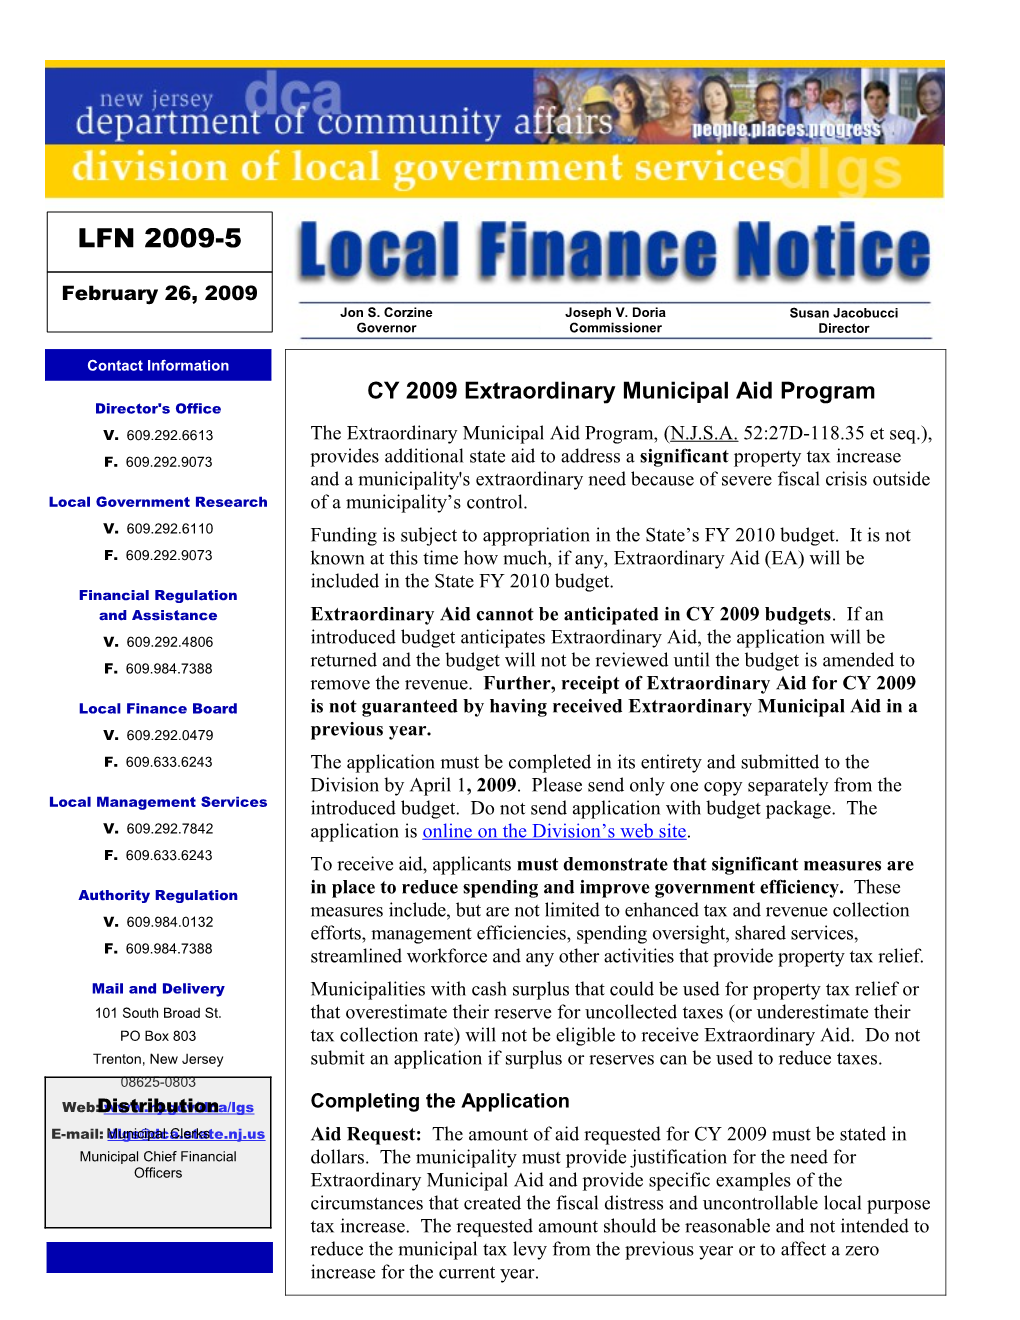 Local Finance Notice 2009-5 2/26/09 Page 2